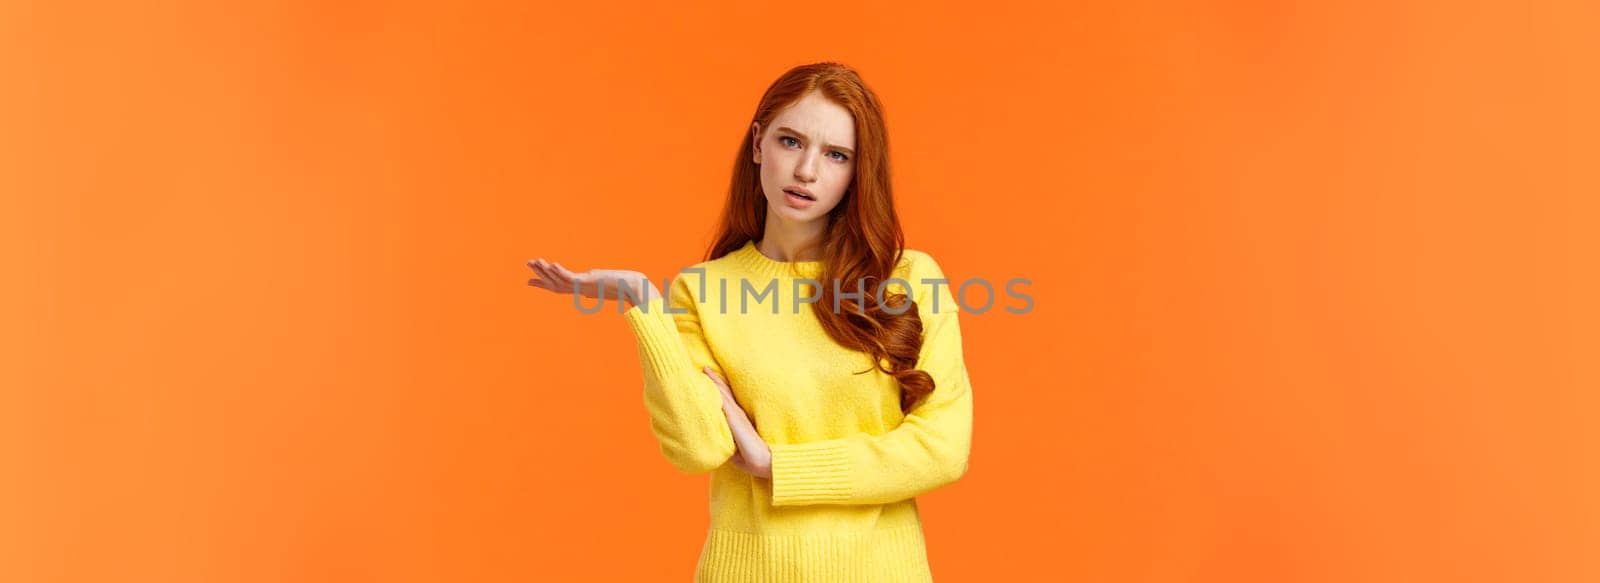 Skeptical and troubled, uncertain young redhead woman cant understand how resolve proble, shrugging raise hands sideways, frowning confused or unsure, standing frustrated orange background.